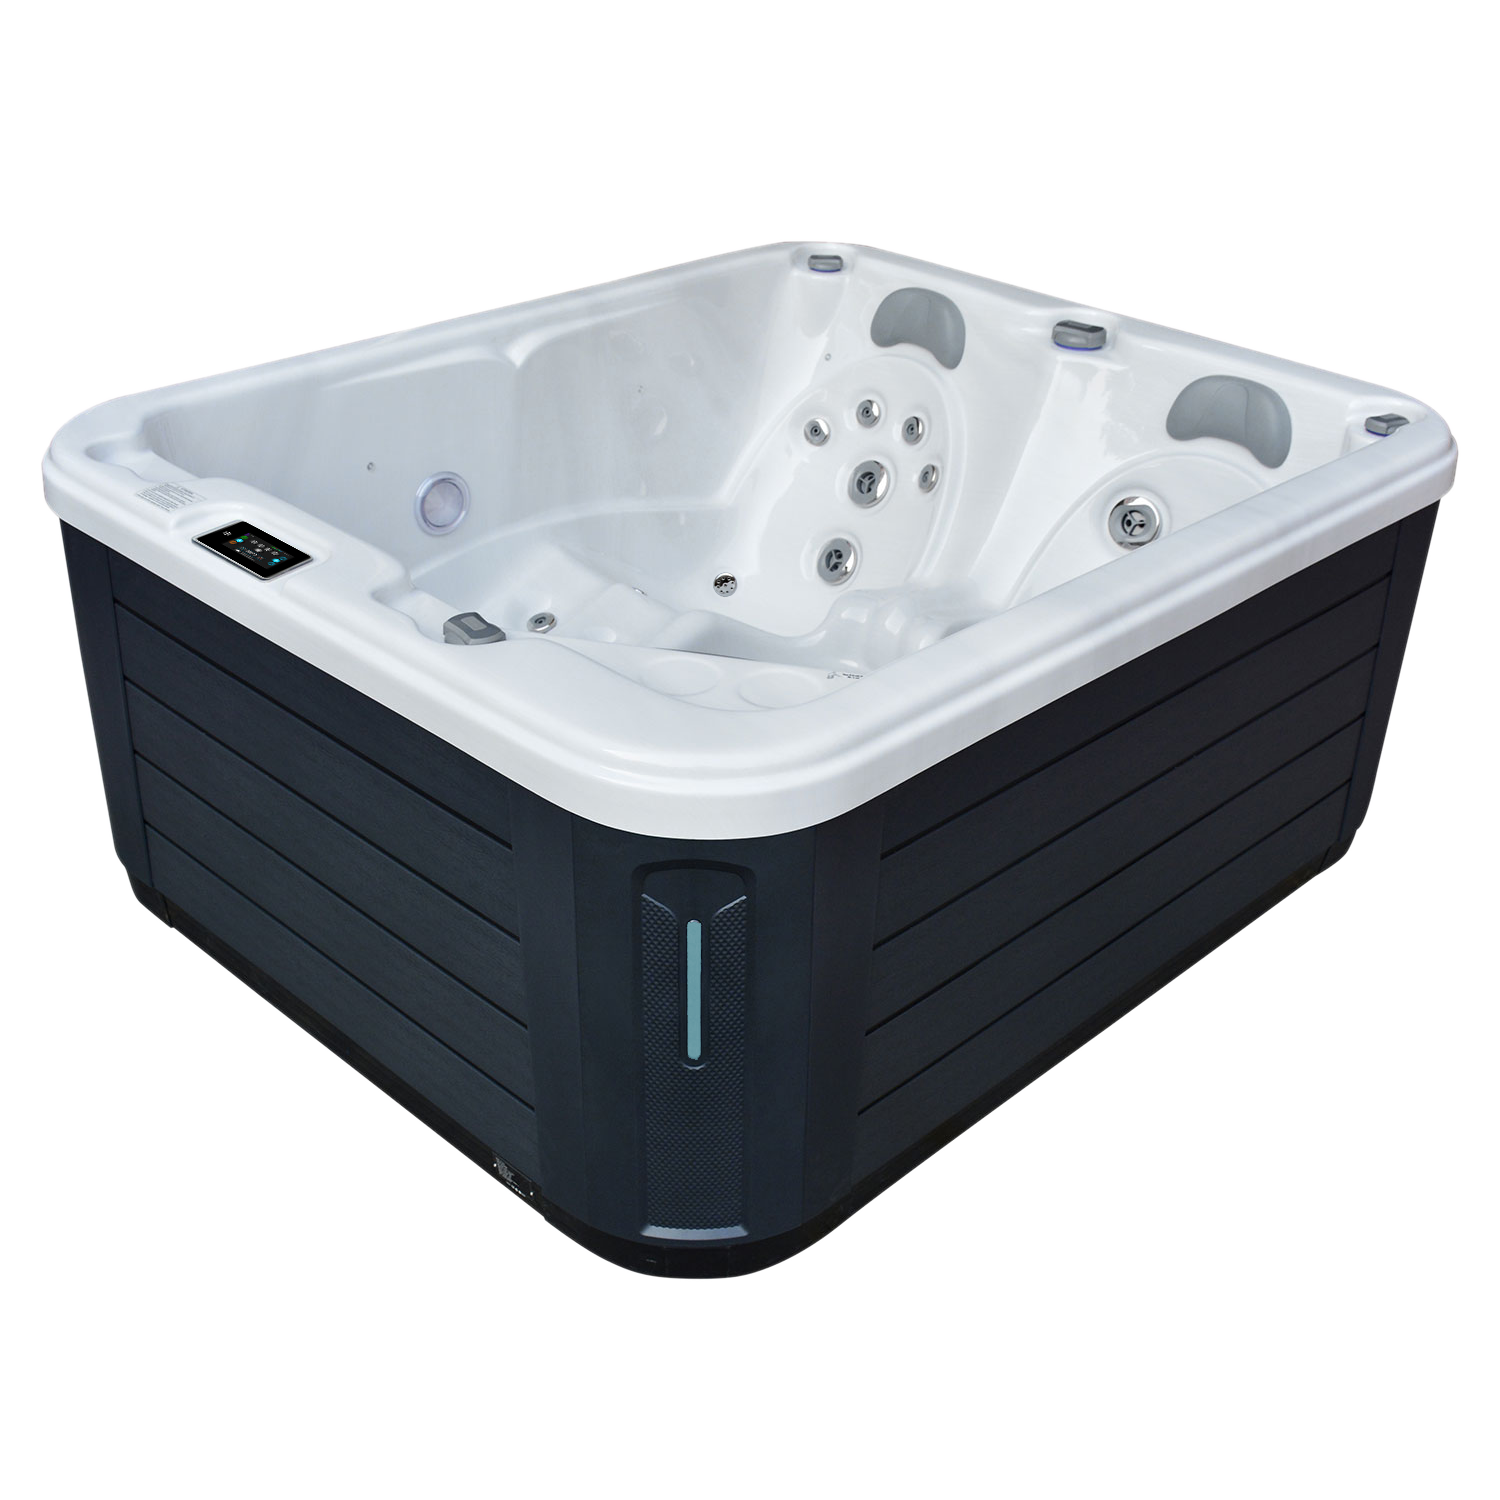 oasis rx-170 heatwave hot tub available at hot tub liverpool 